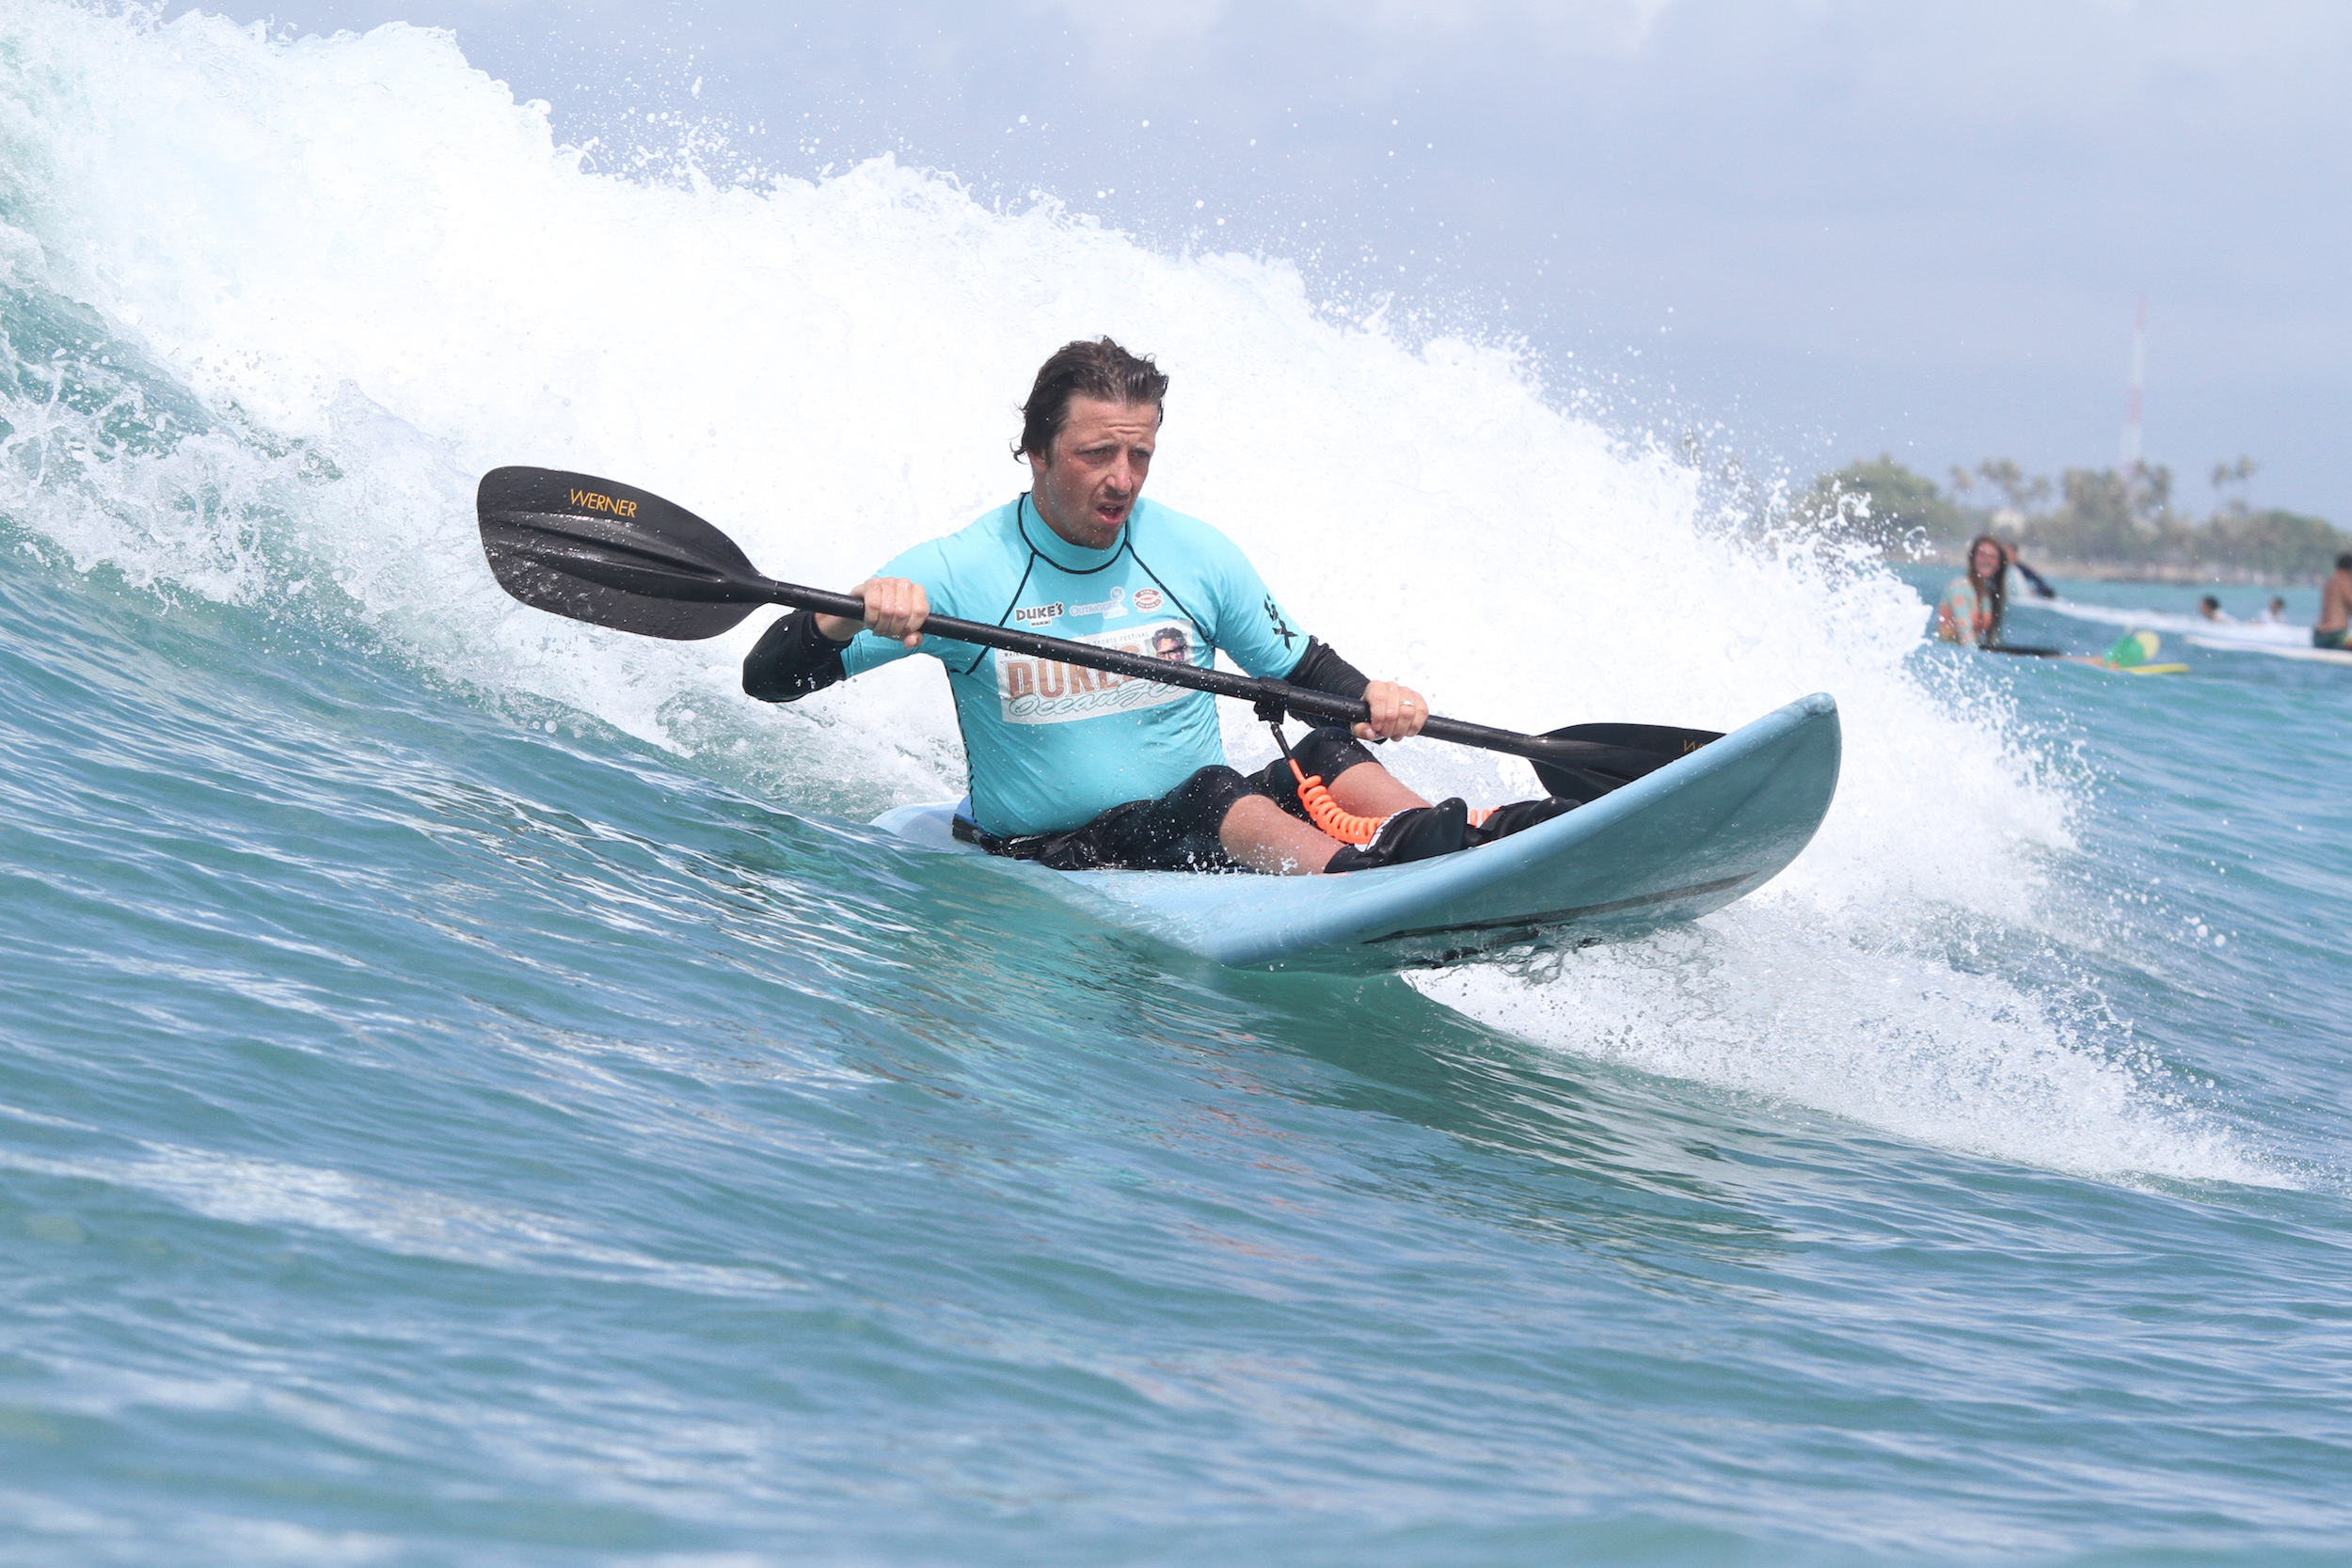 AccesSurf presents Hawaii Adaptive Surf Championships, a three-day surfing contest featuring watermen and waterwomen athletes who have overcome physical challenges, including paralysis and amputation.